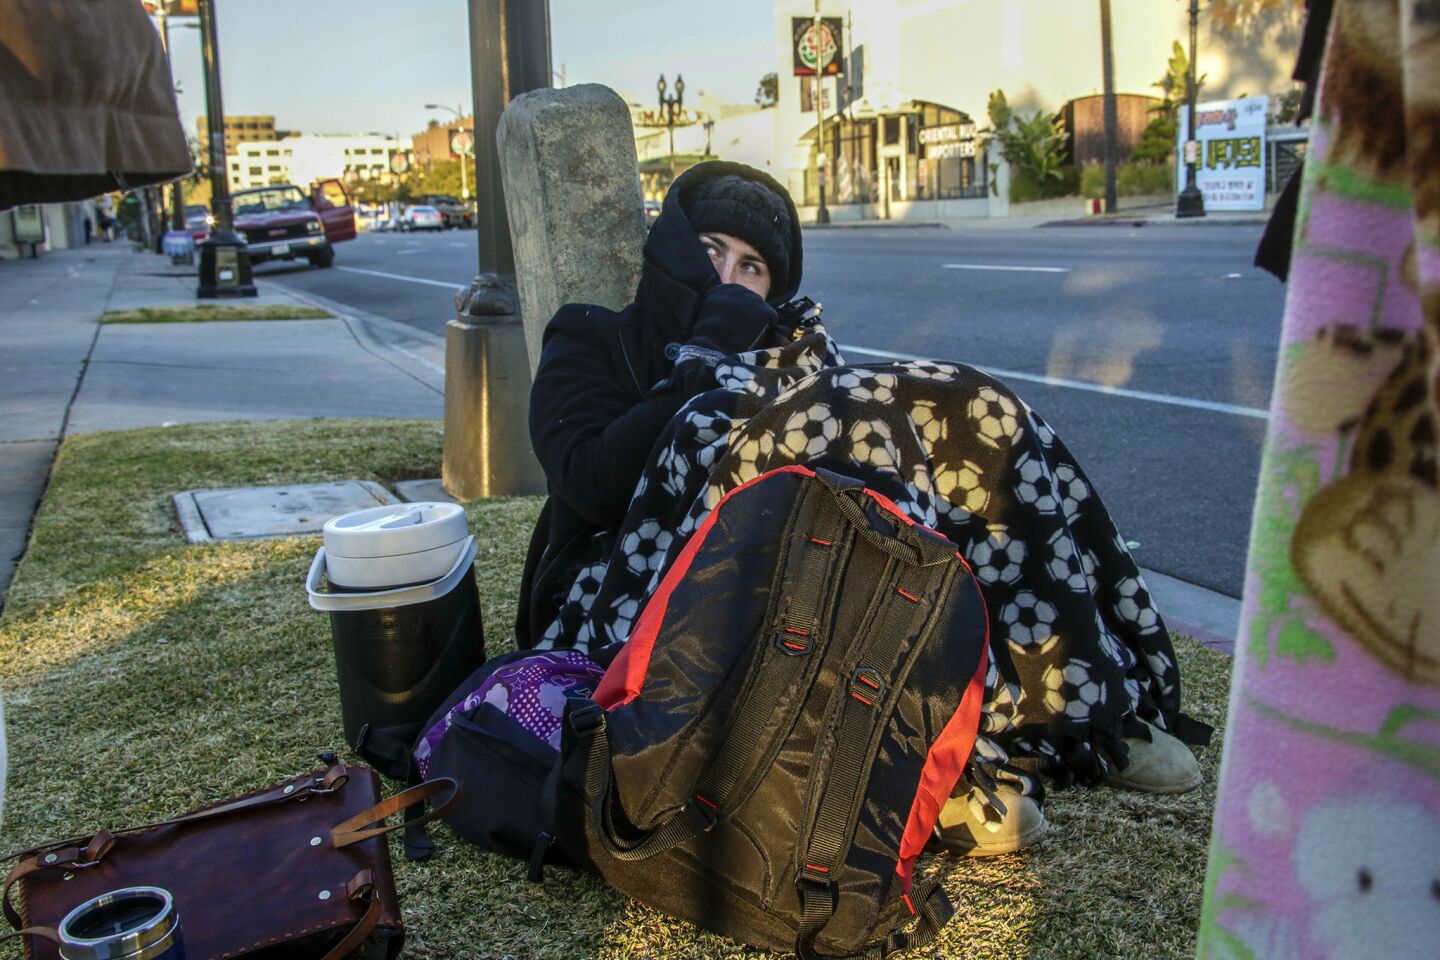 Jamie Hearn, all bundled up to beat early morning cold, holds a spot along Colorado Boulevard prior to the Rose Parade.